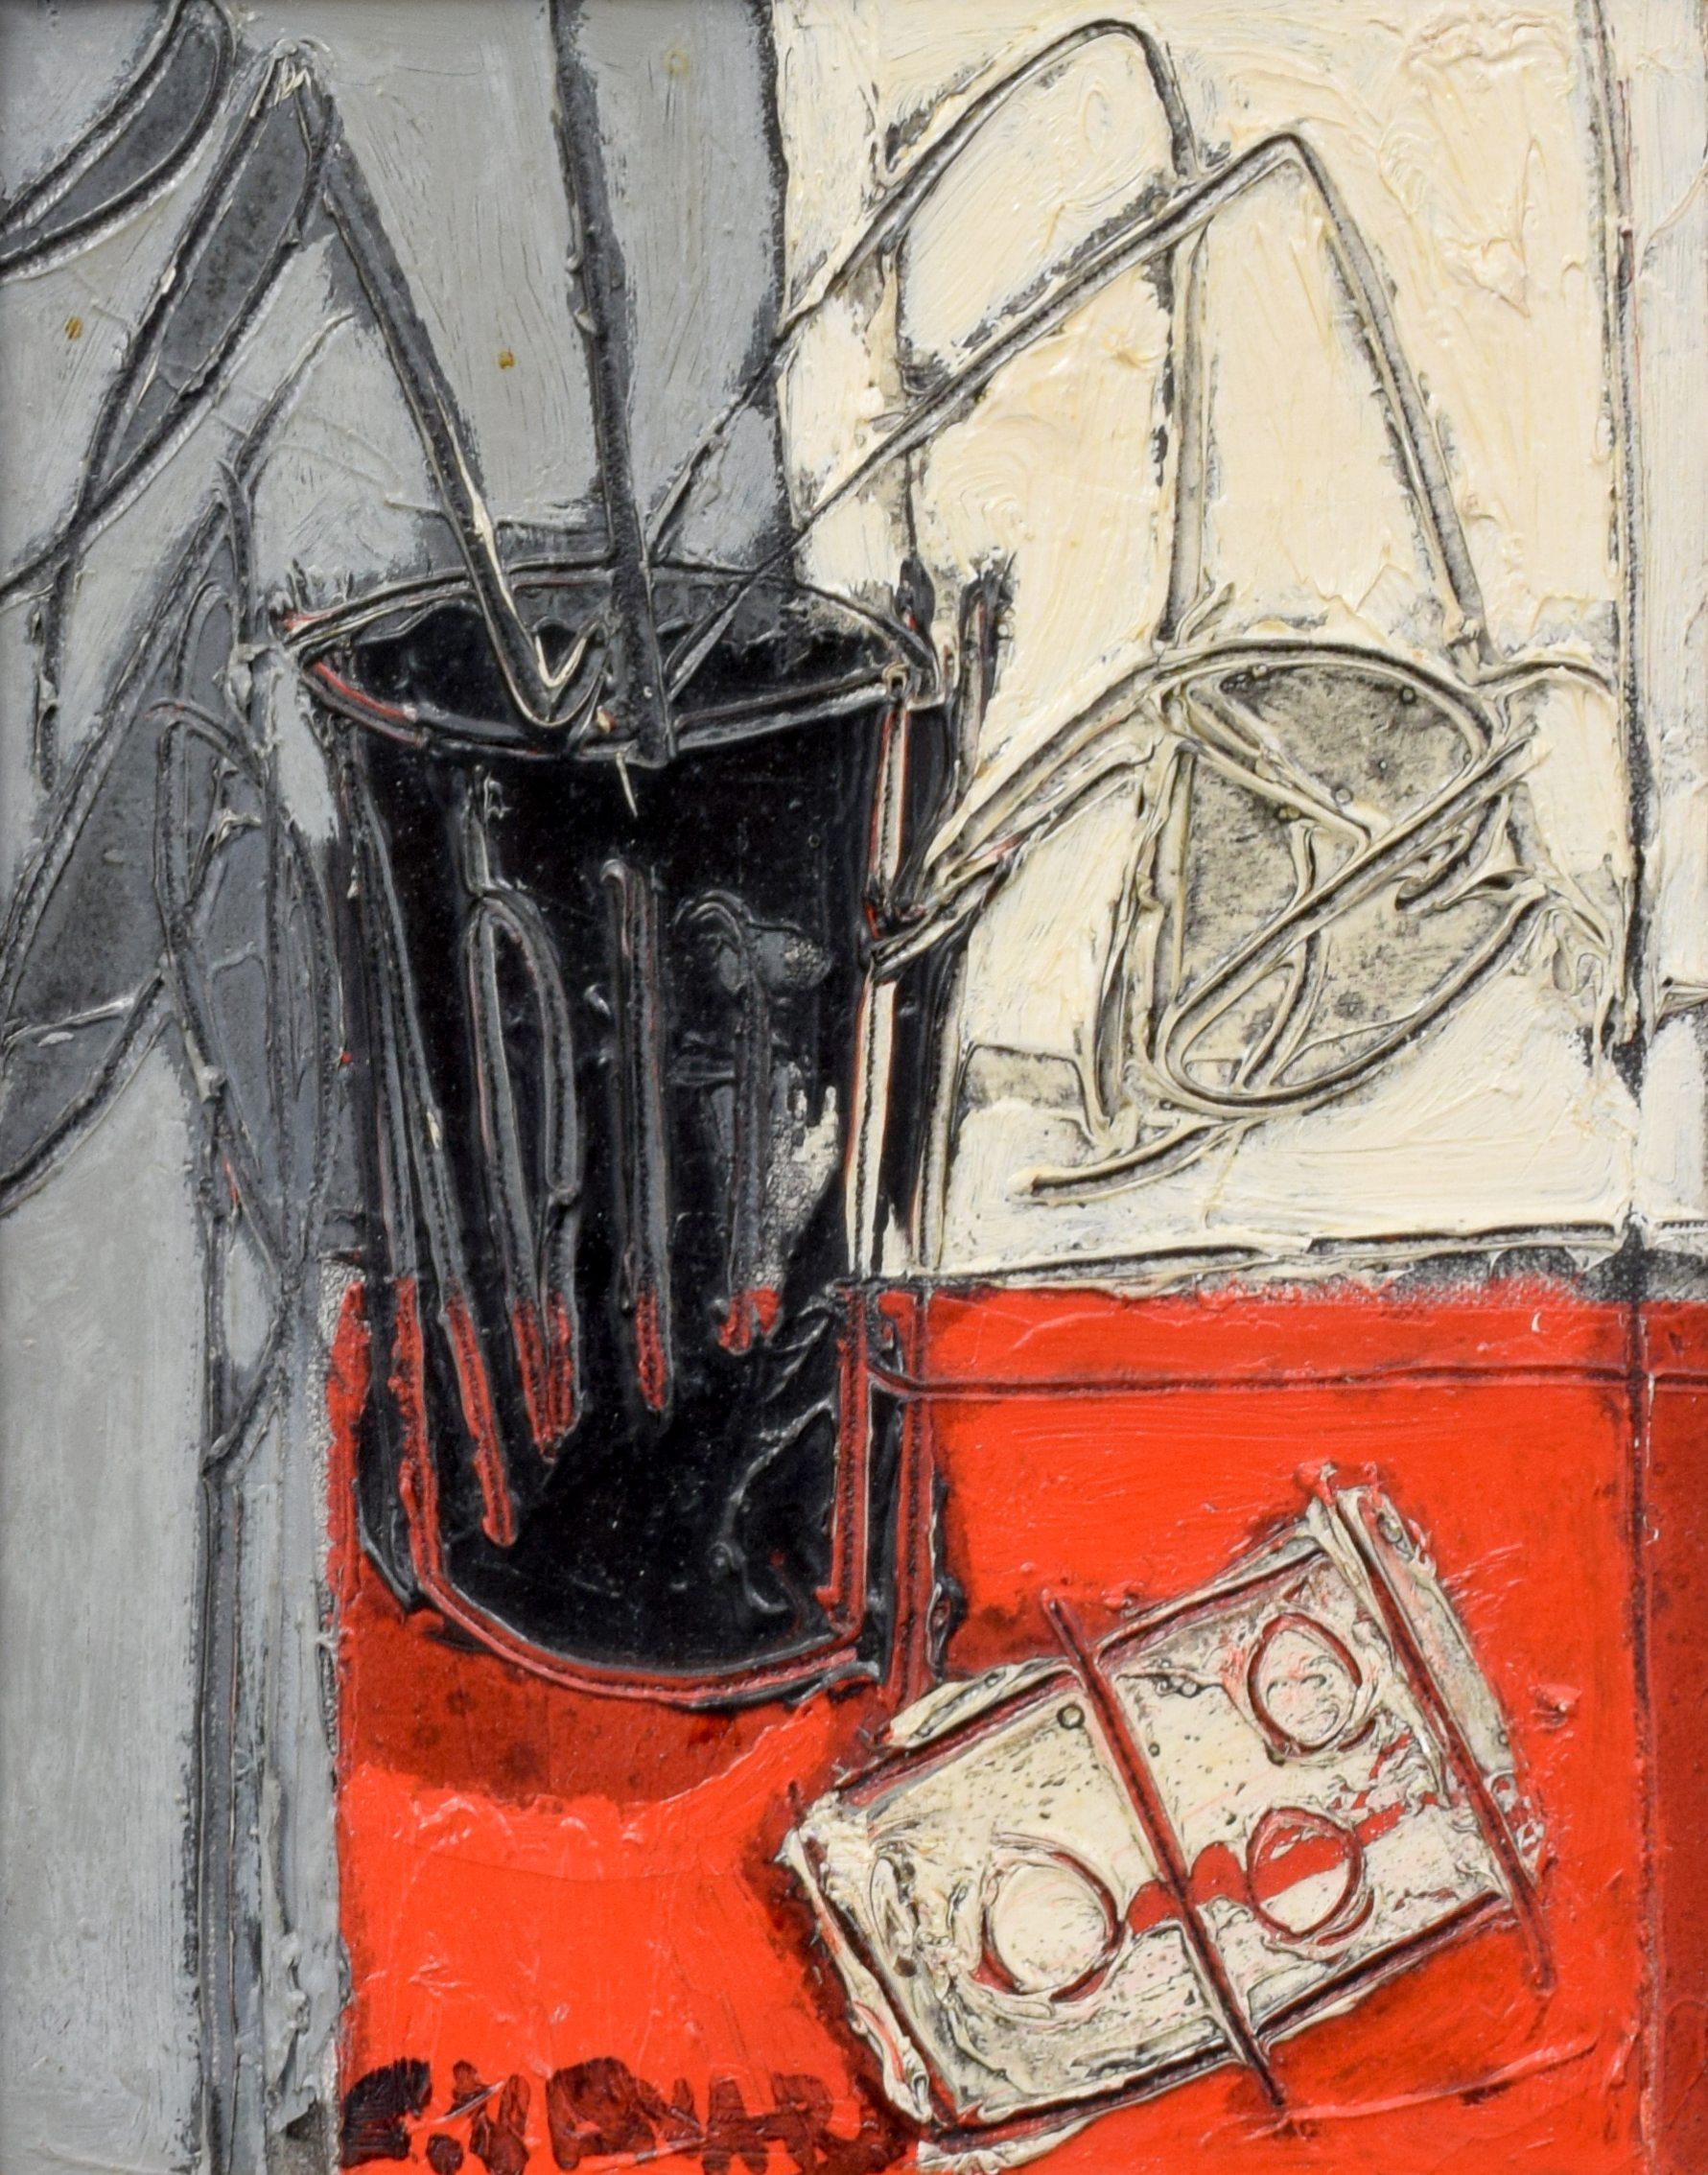 Claude Vénard Abstract Painting - Still Life Post-Cubist Painting by Claude Venard 'Le Domino'